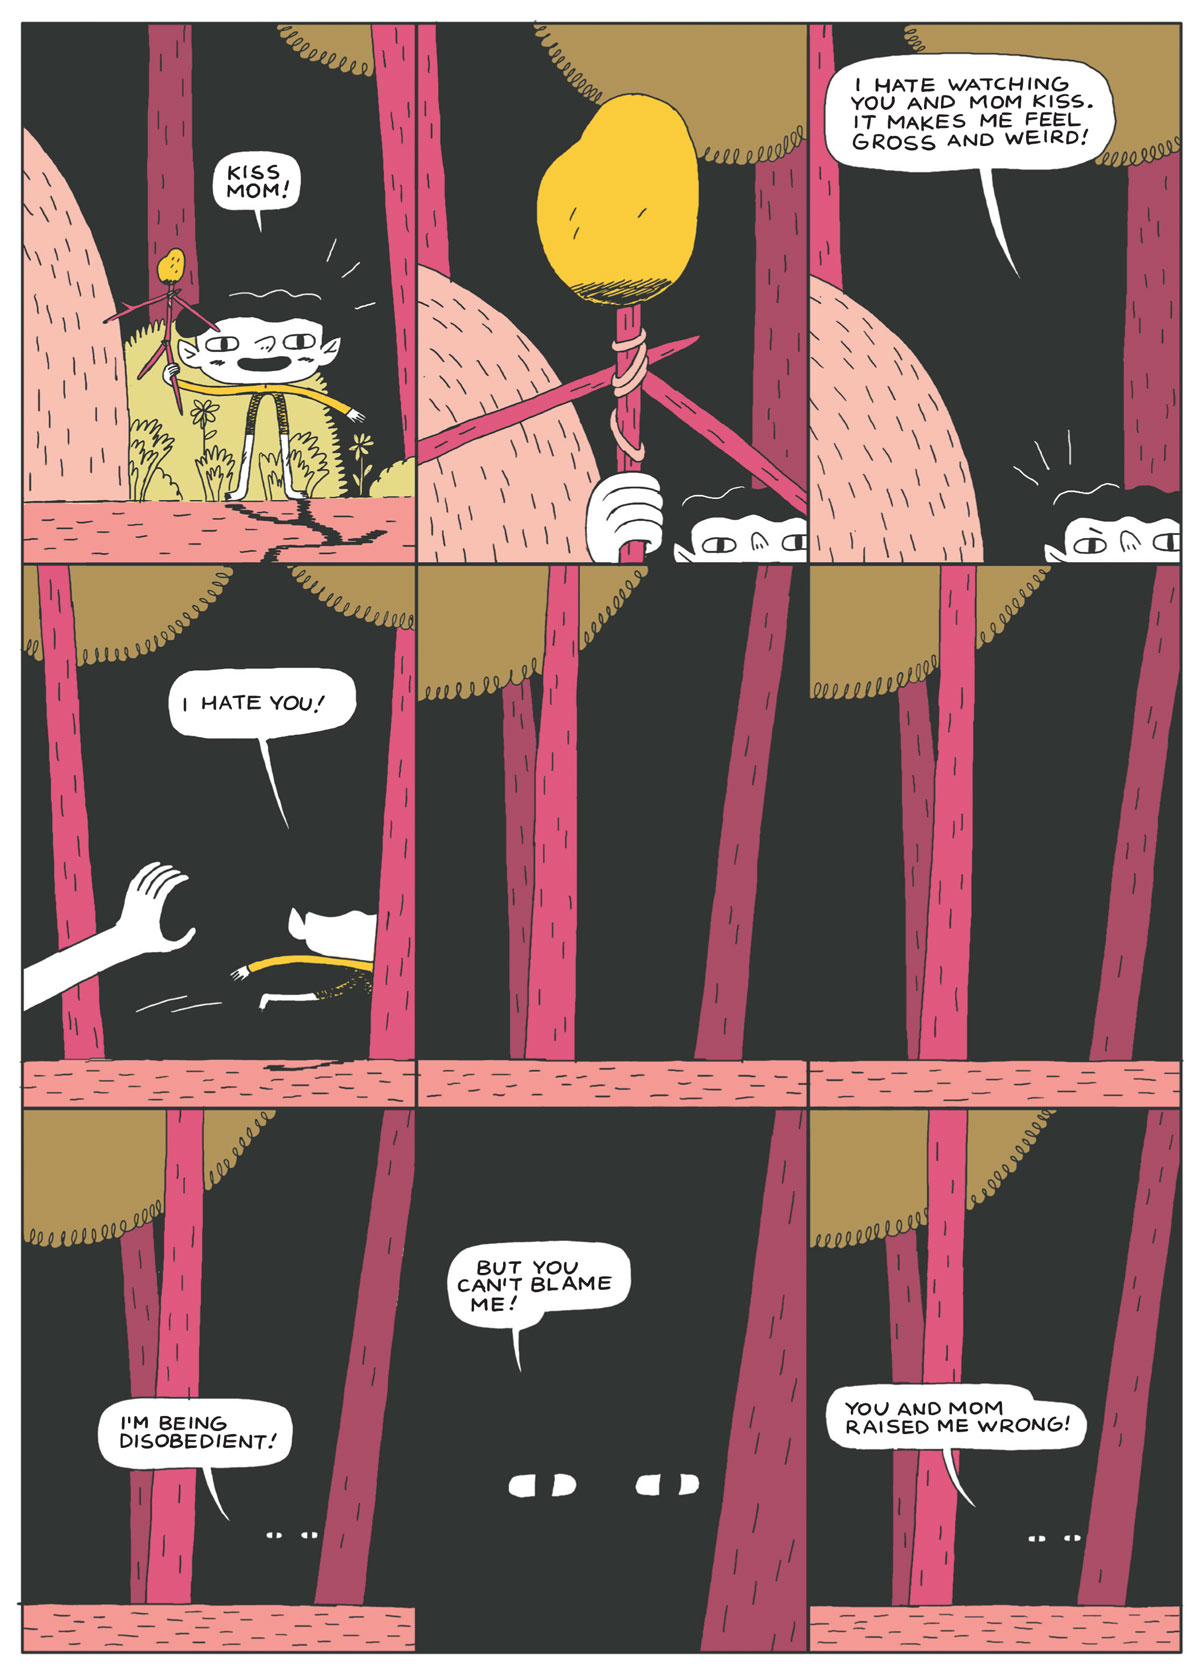 Comic by Michael DeForge